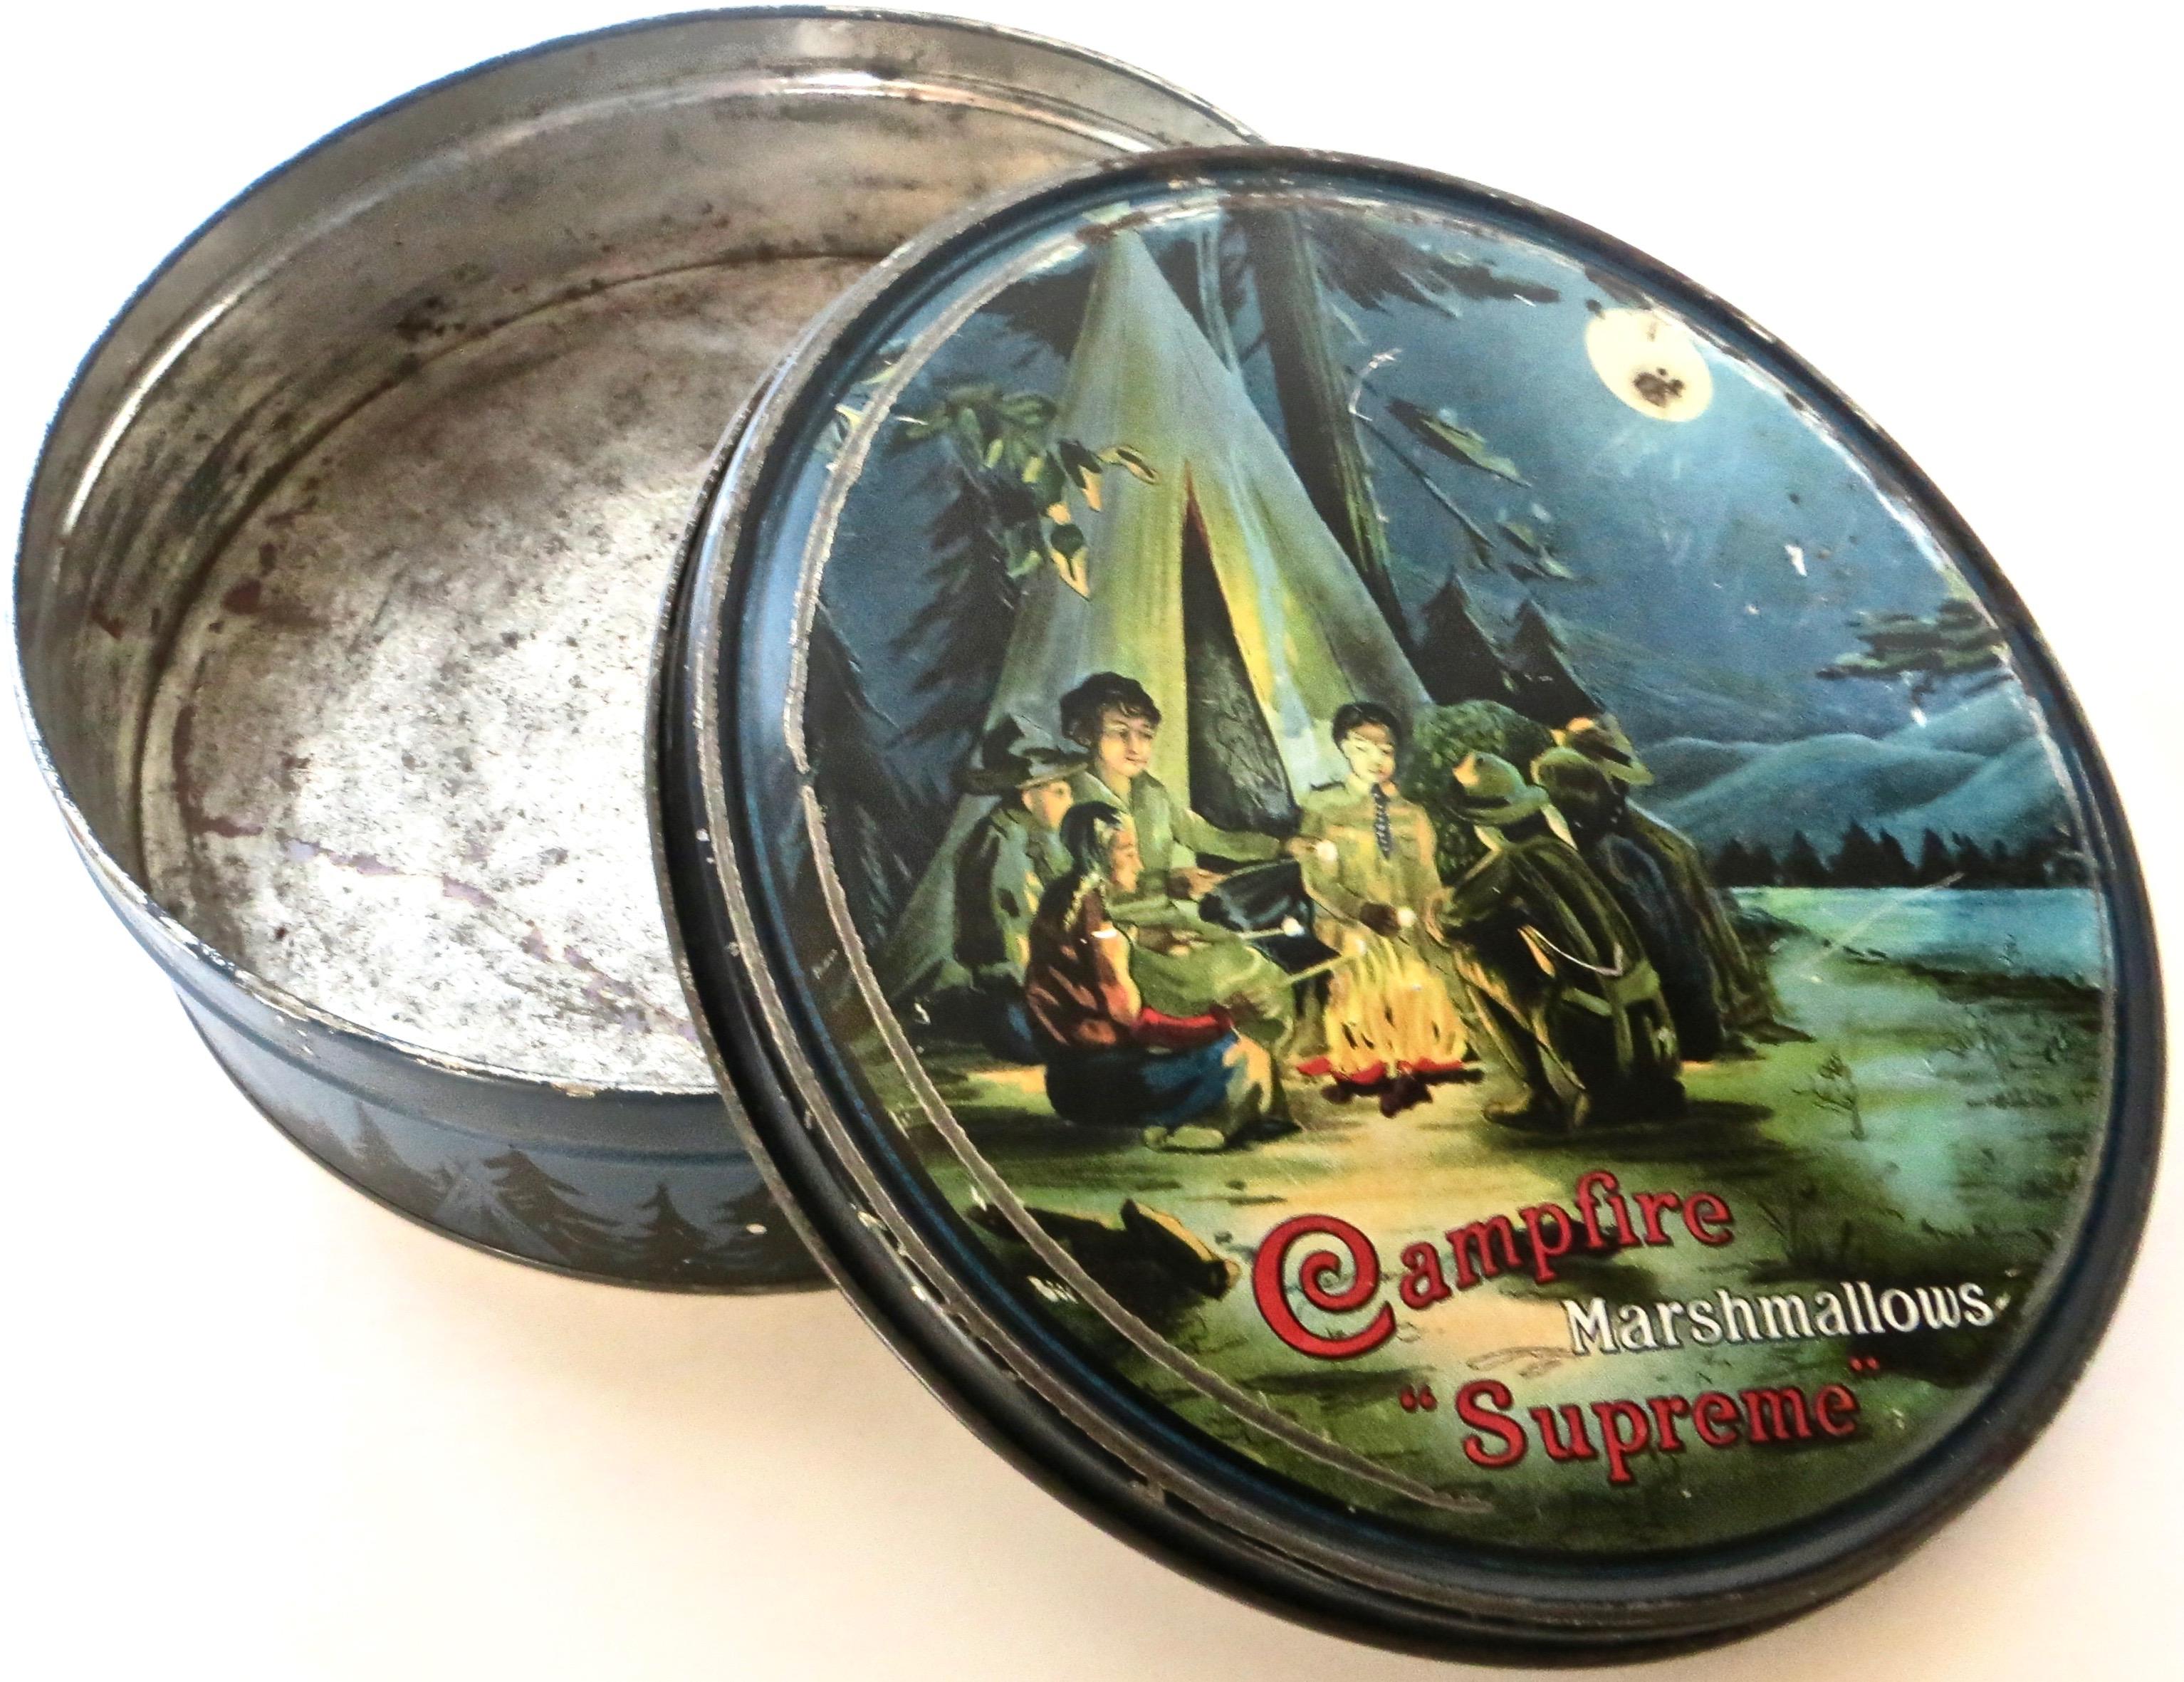 This is a rare tin that was used to sell and promote marshmallows. The top of the tin is decorated to reflect the Boy Scouts in their ubiquitous camping tradition of sitting around the campfire, roasting marshmallows on a brightly lit full moon